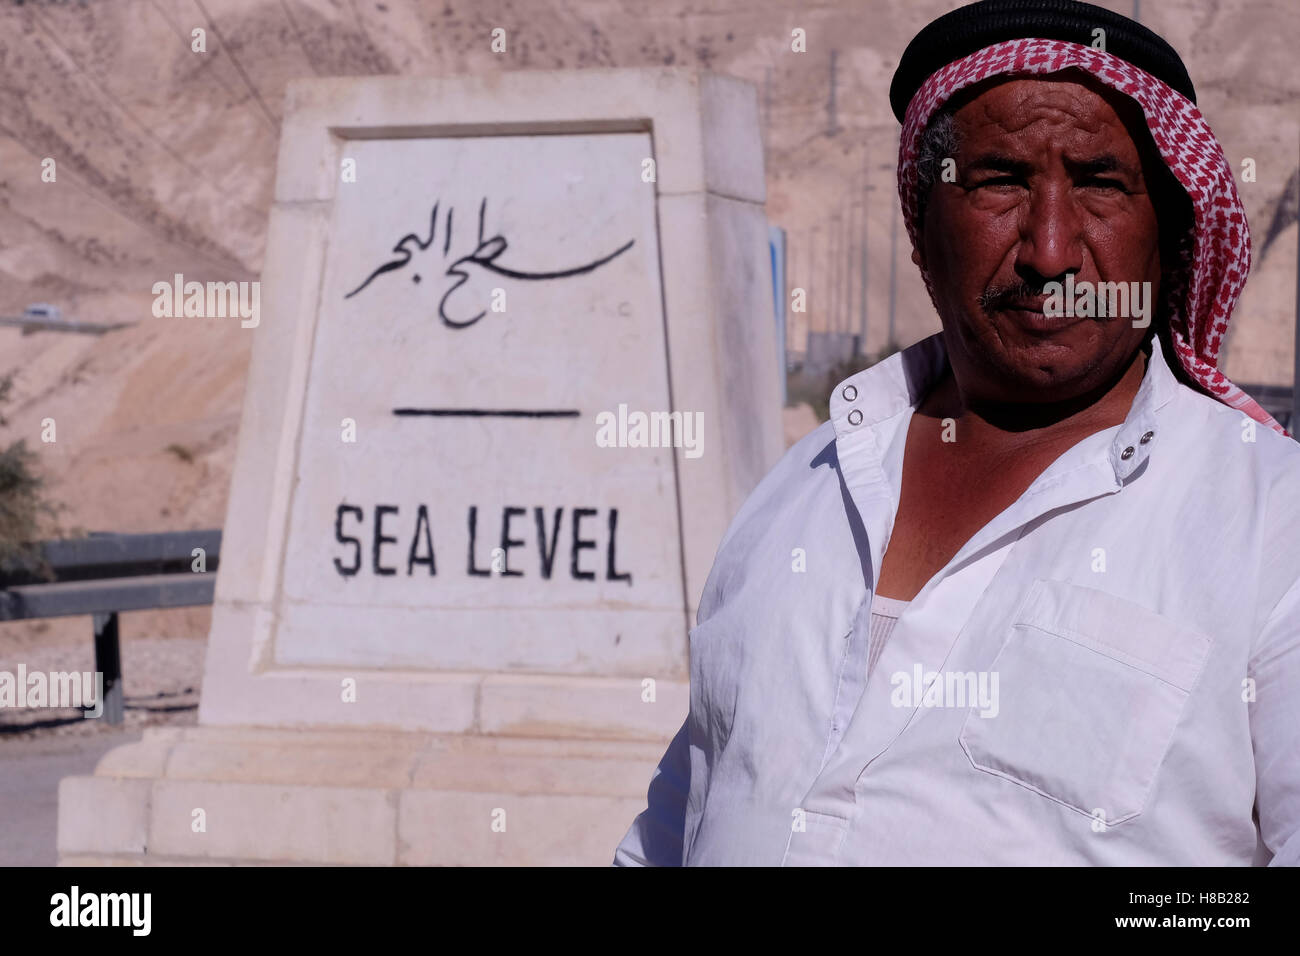 A Palestinian man posing next to a sea-level indicator, on the road from Jerusalem to the Dead Sea in the Judaean or Judean desert Israel Stock Photo